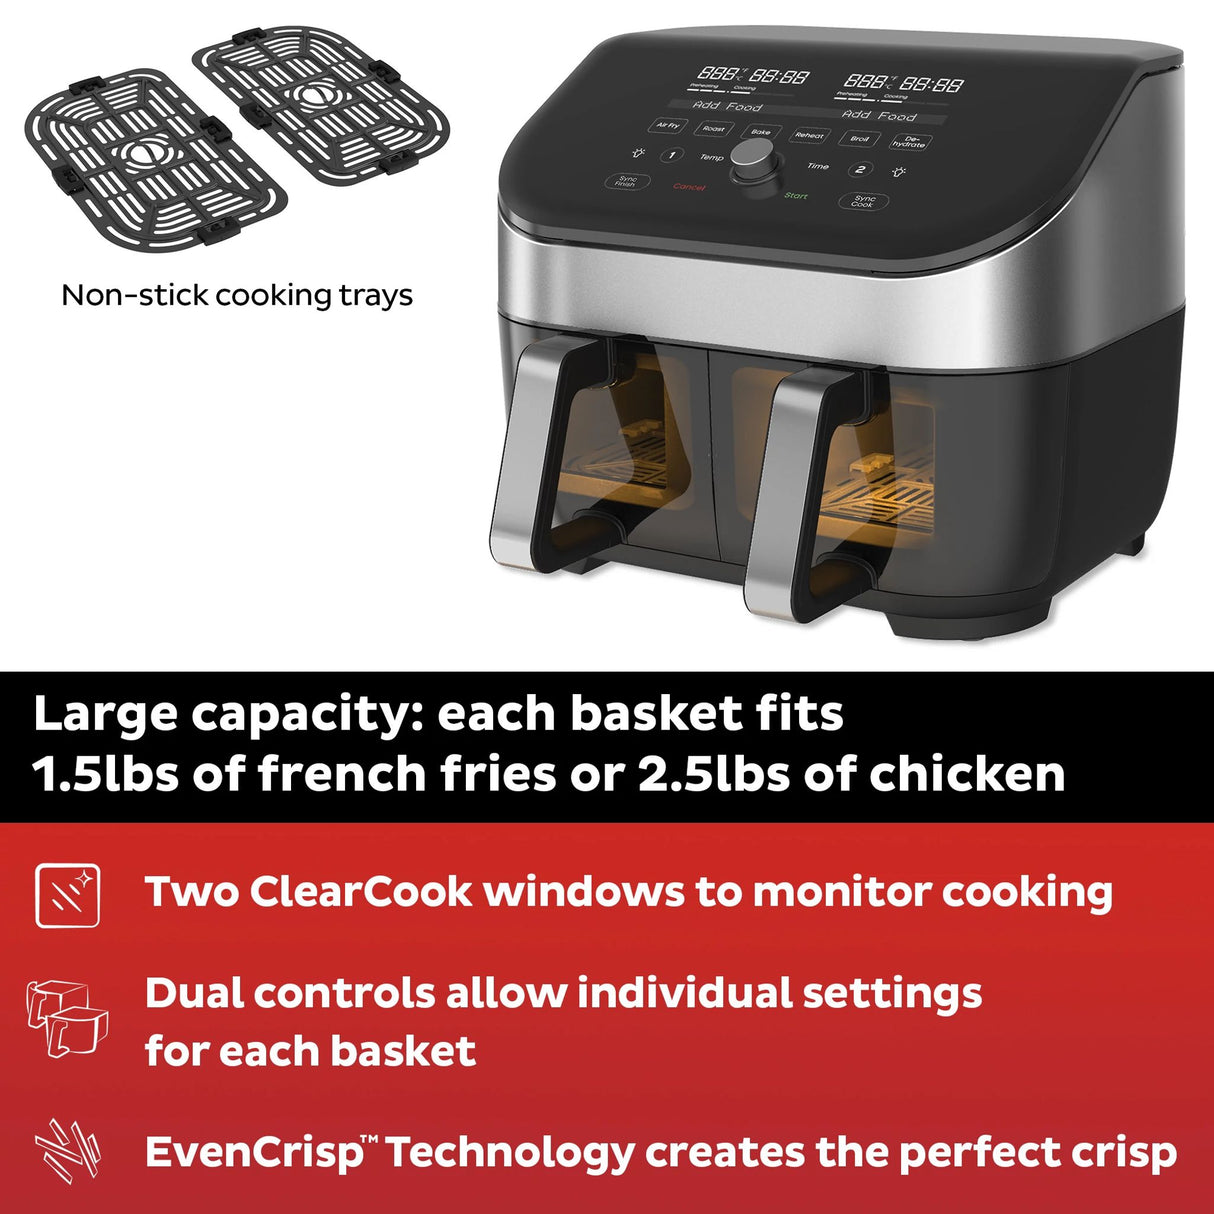  Vortex Plus Dual 8-qt Stainless Steel Air Fryer with ClearCook large capacity baskest holds 1.5lbs french fries / 2.5lbs chicken